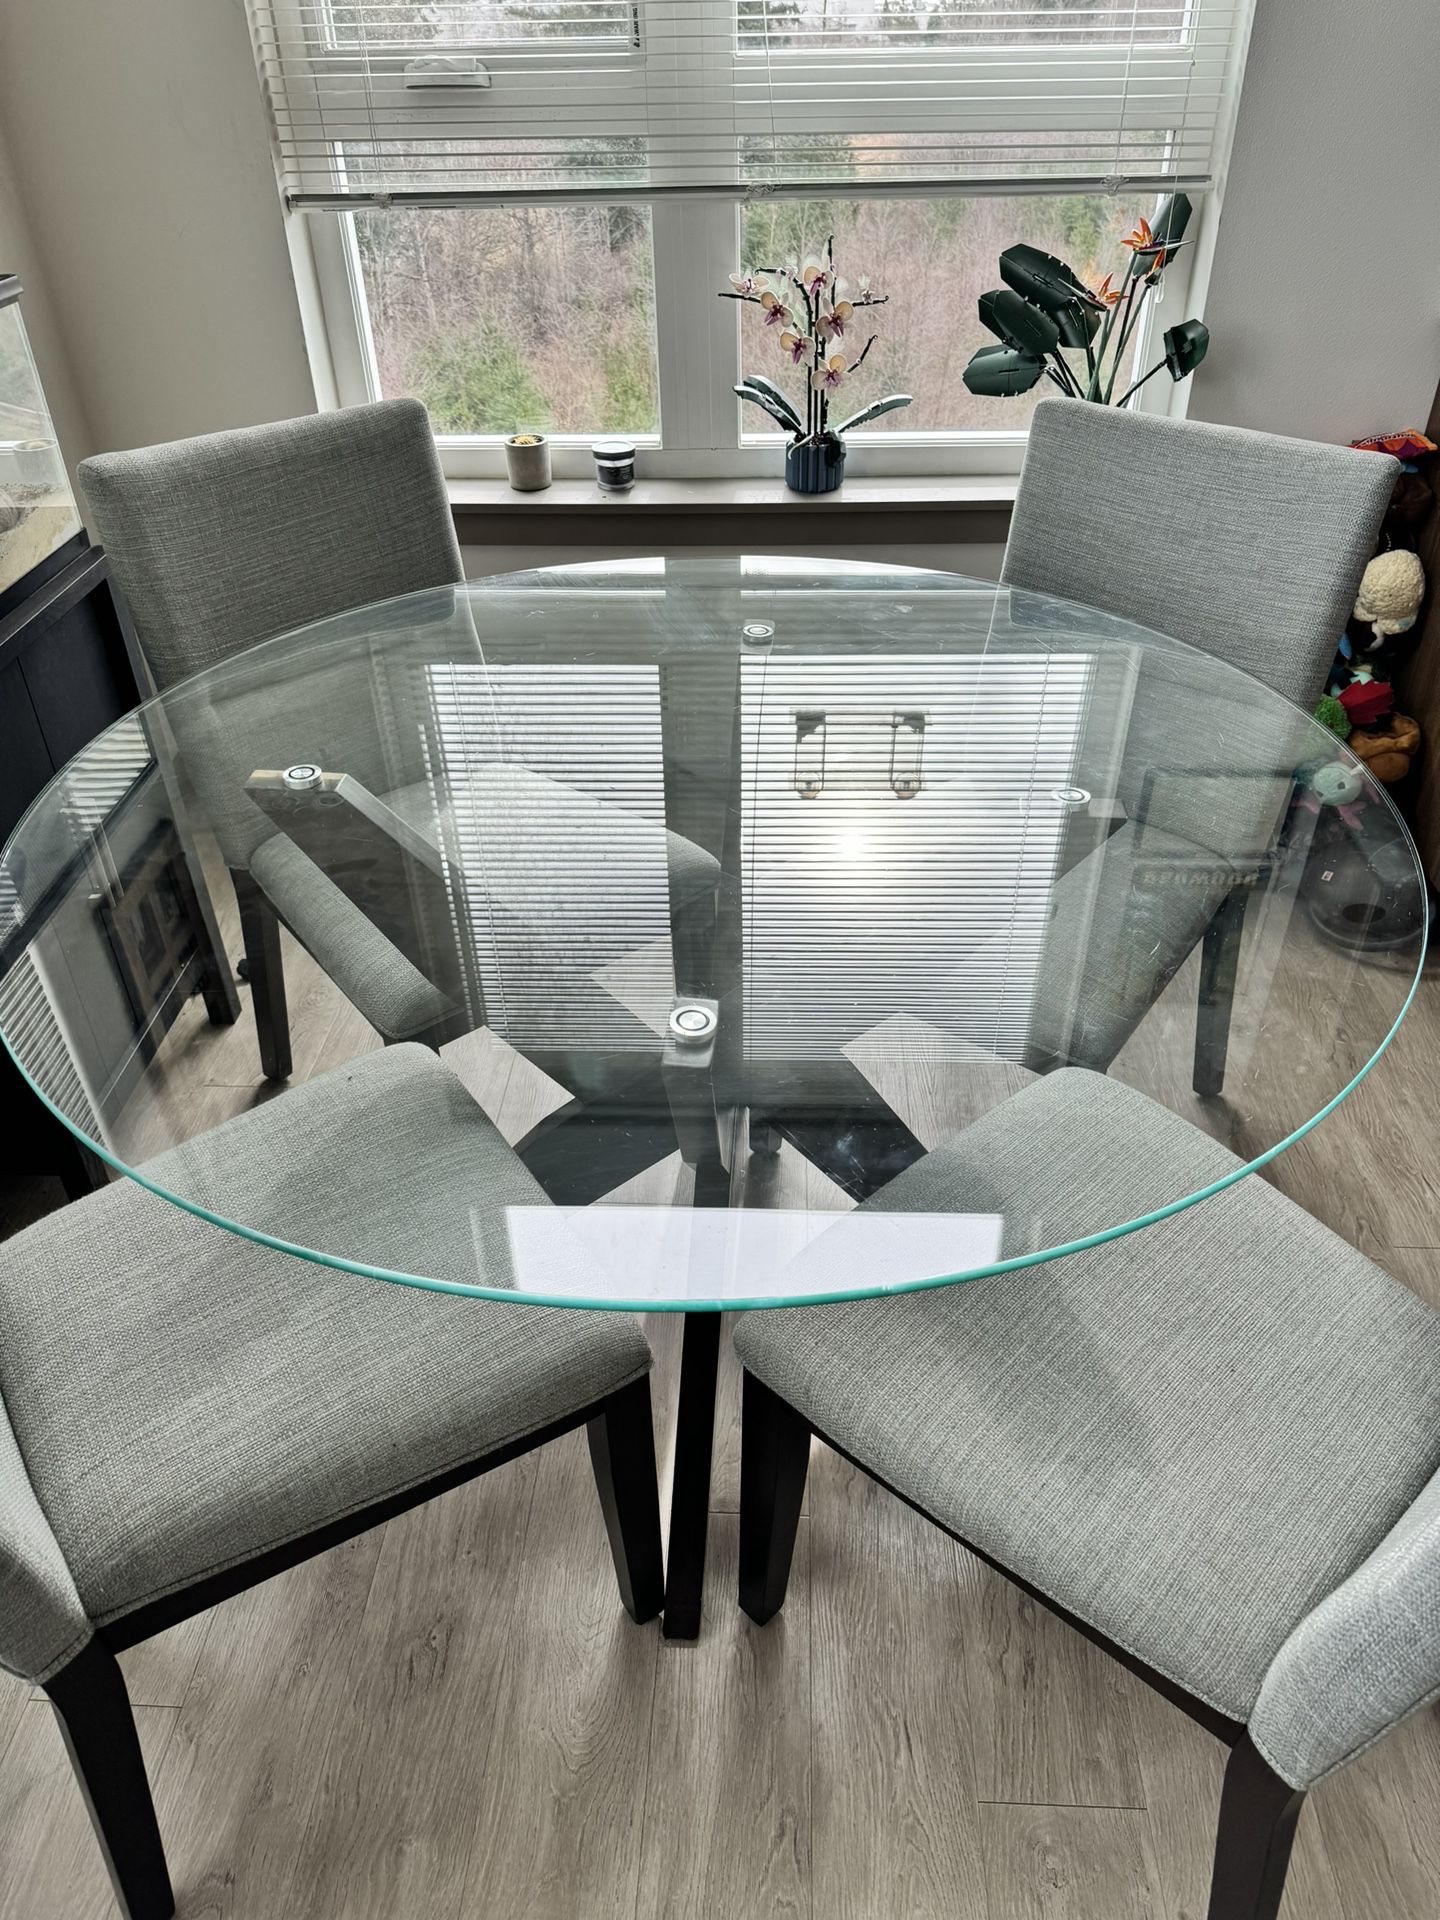 5-Piece Round Glass Table Dining Set